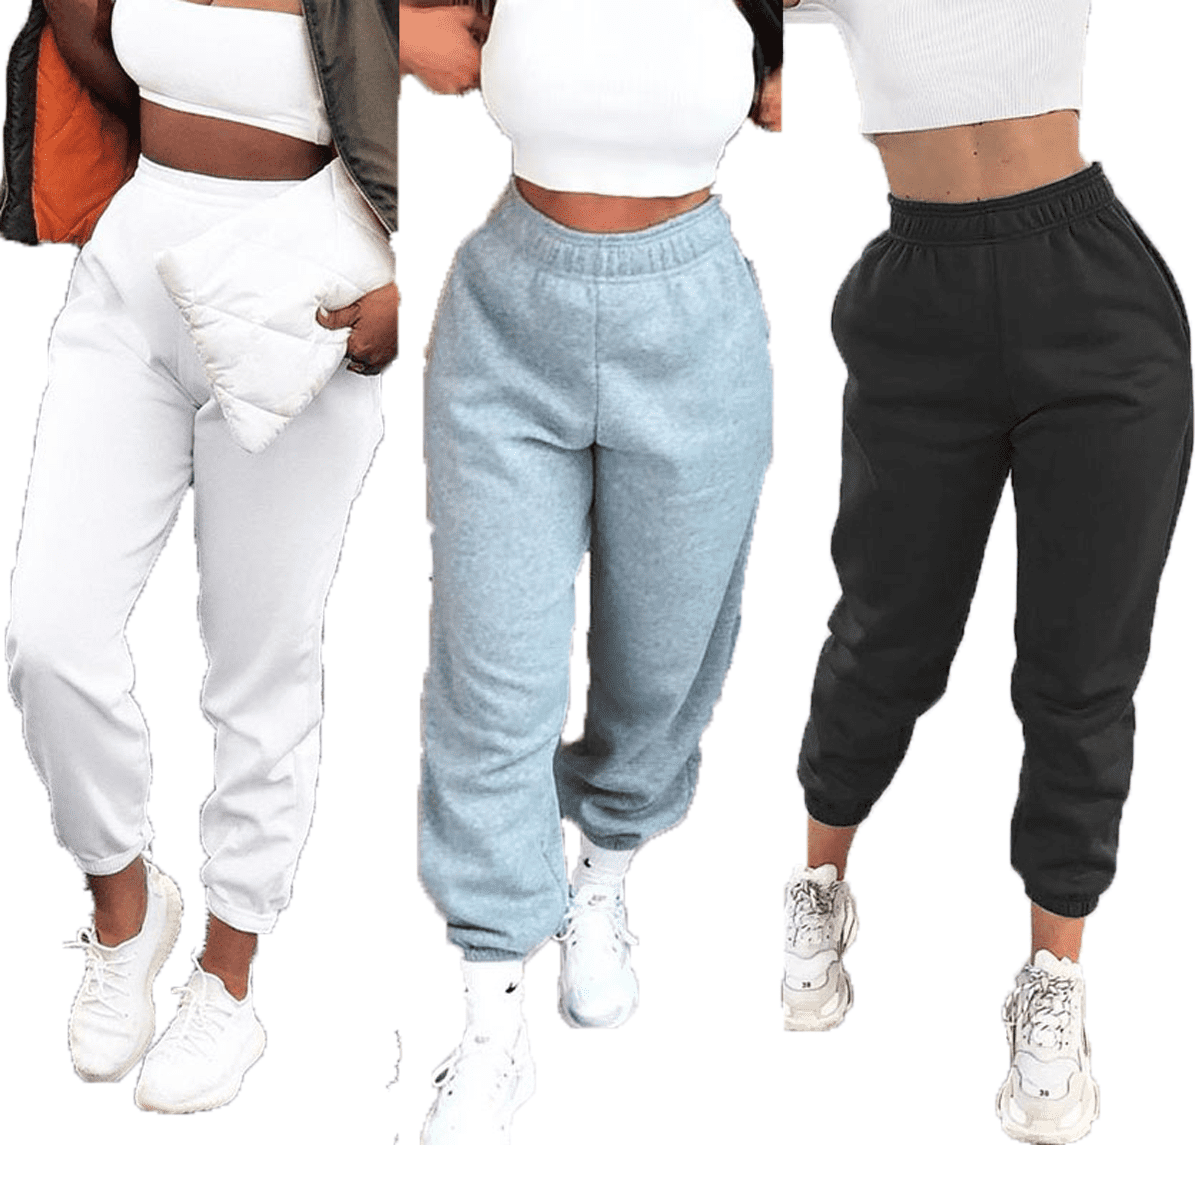 Buy > best high waisted sweatpants > in stock